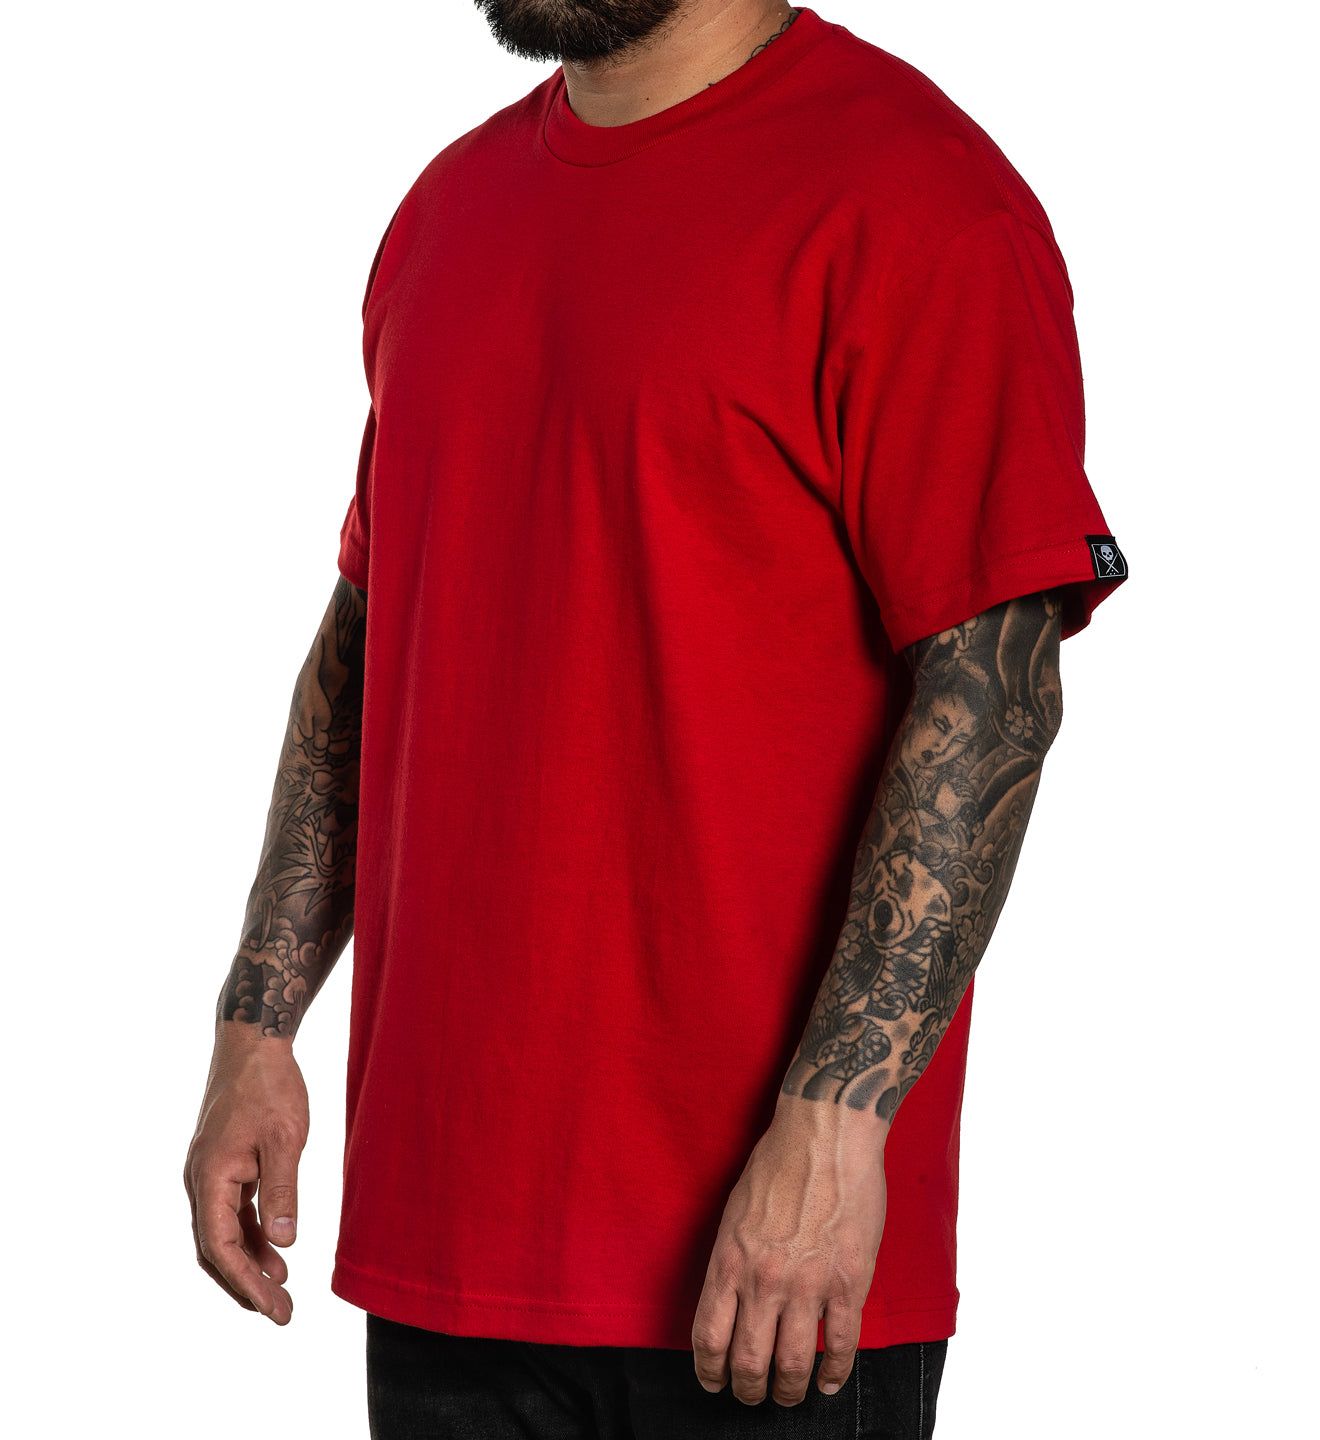 The Solids Standard - Tees